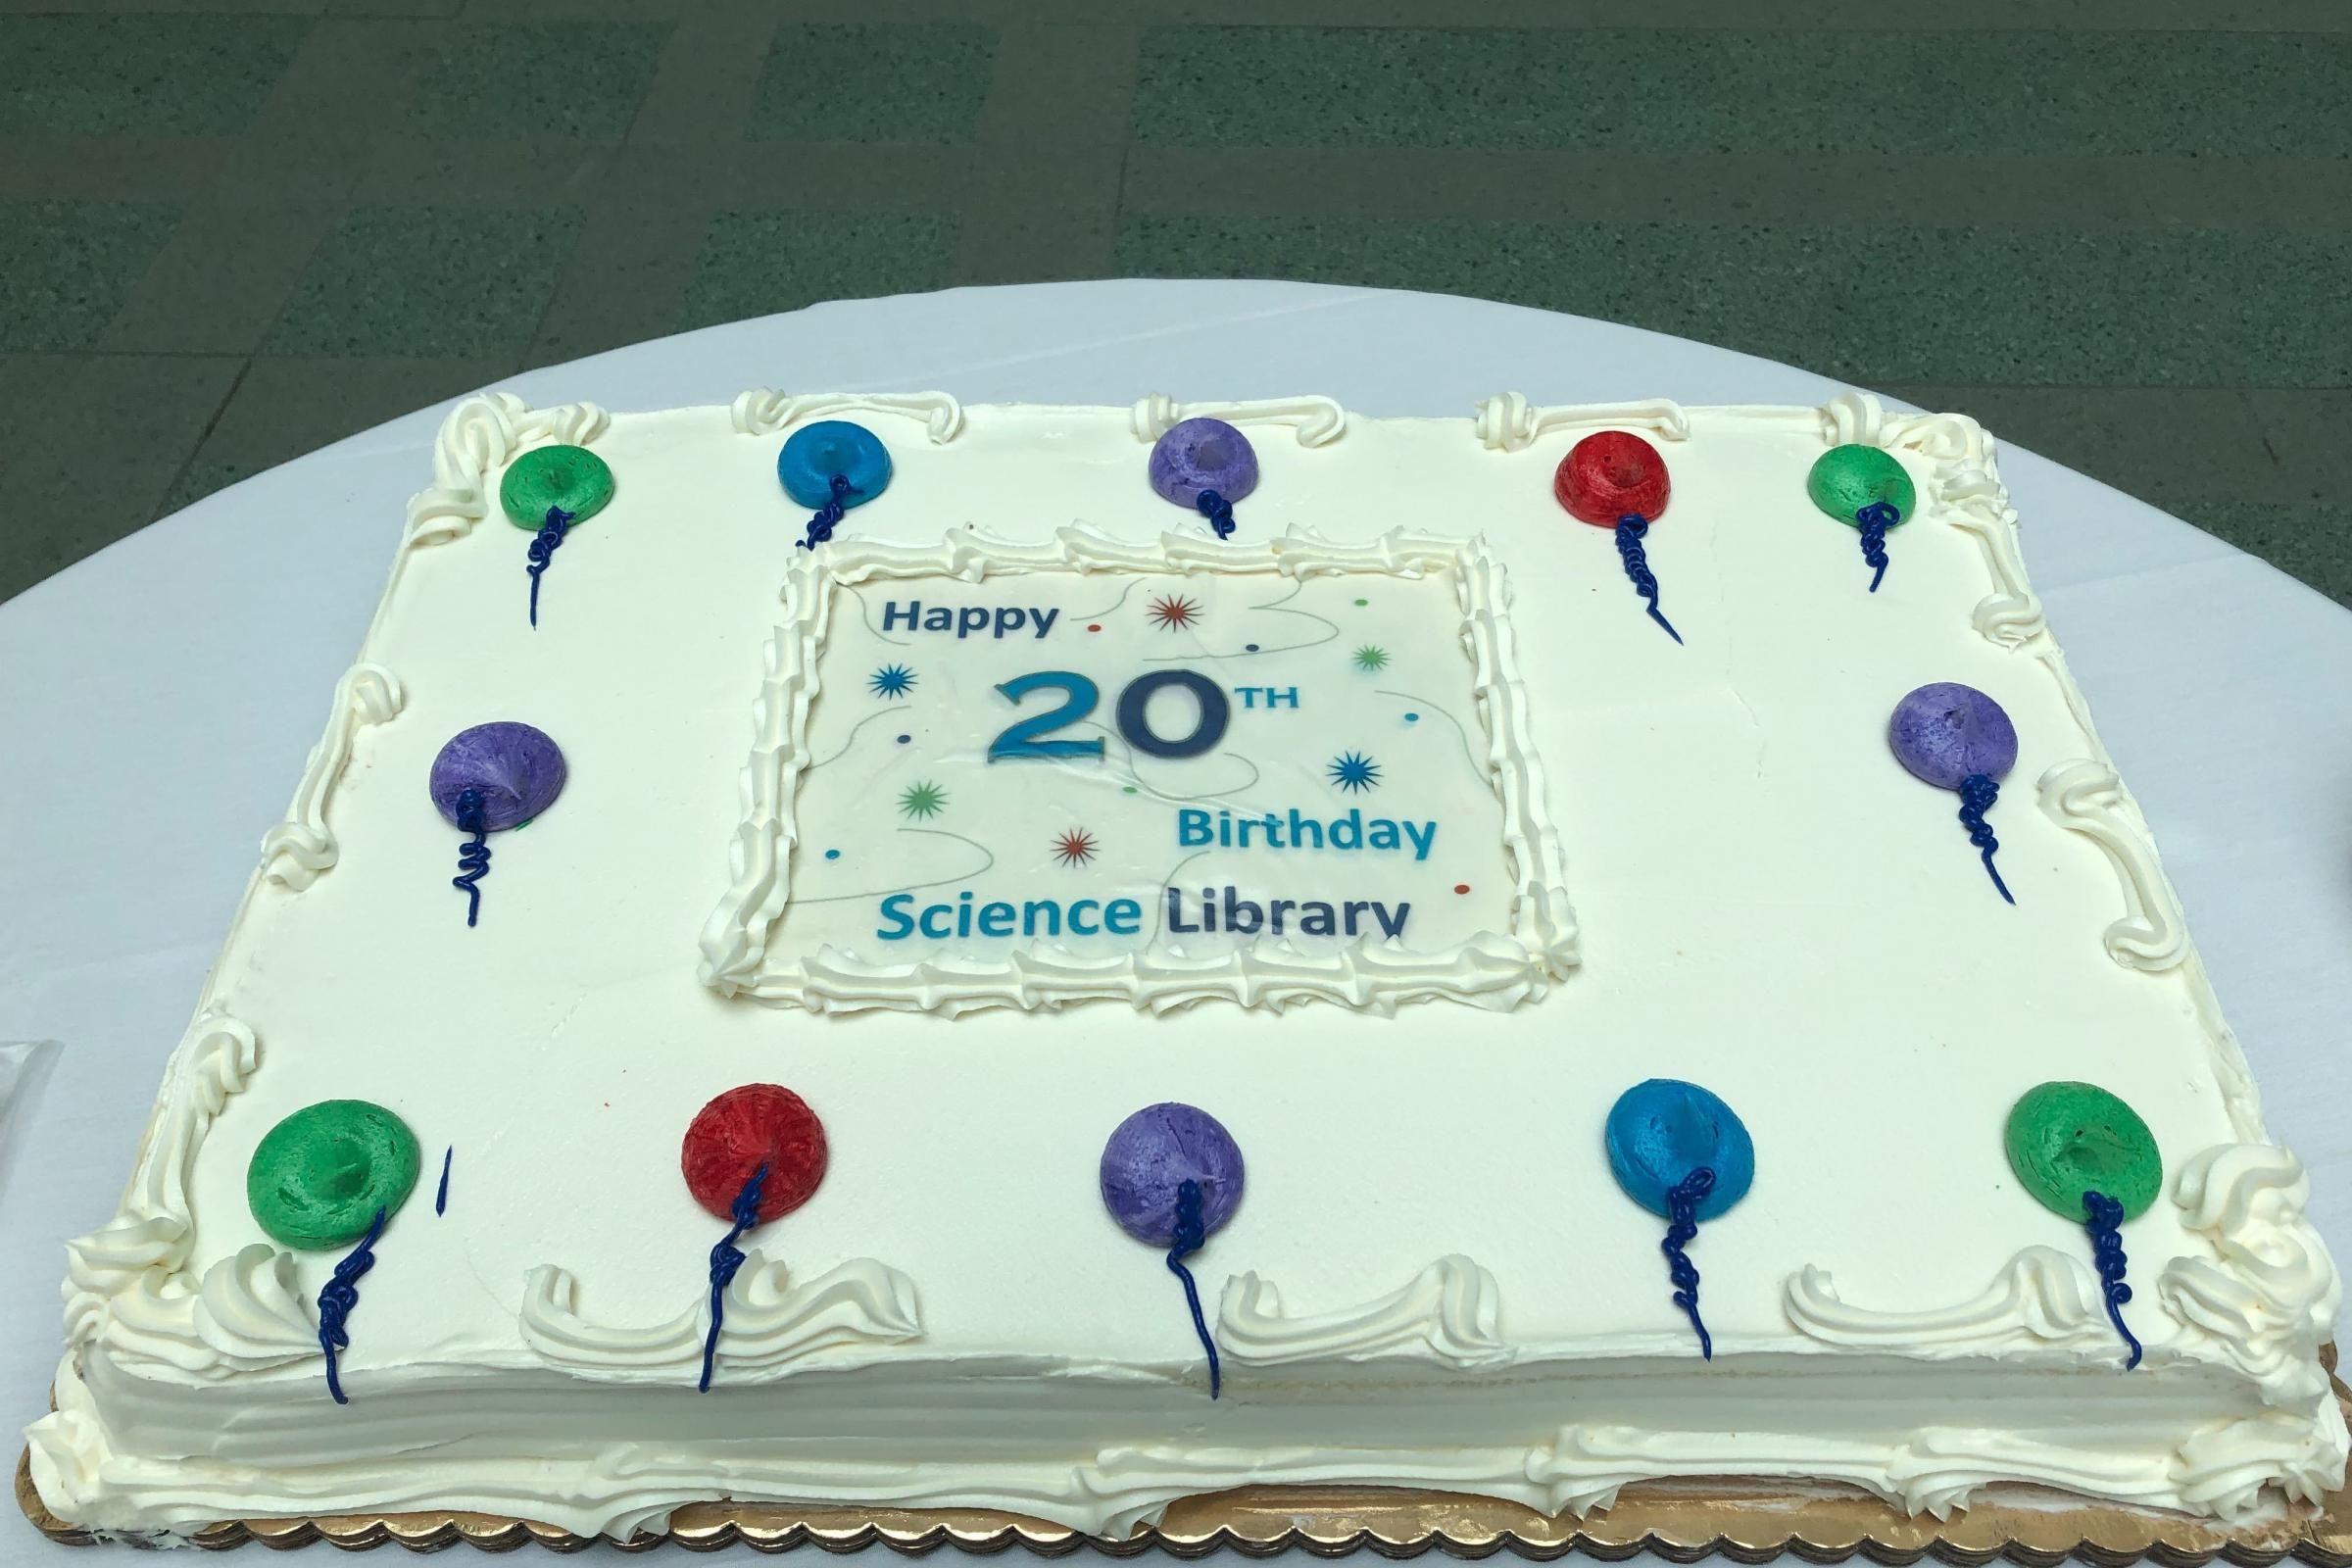 Science Library cake